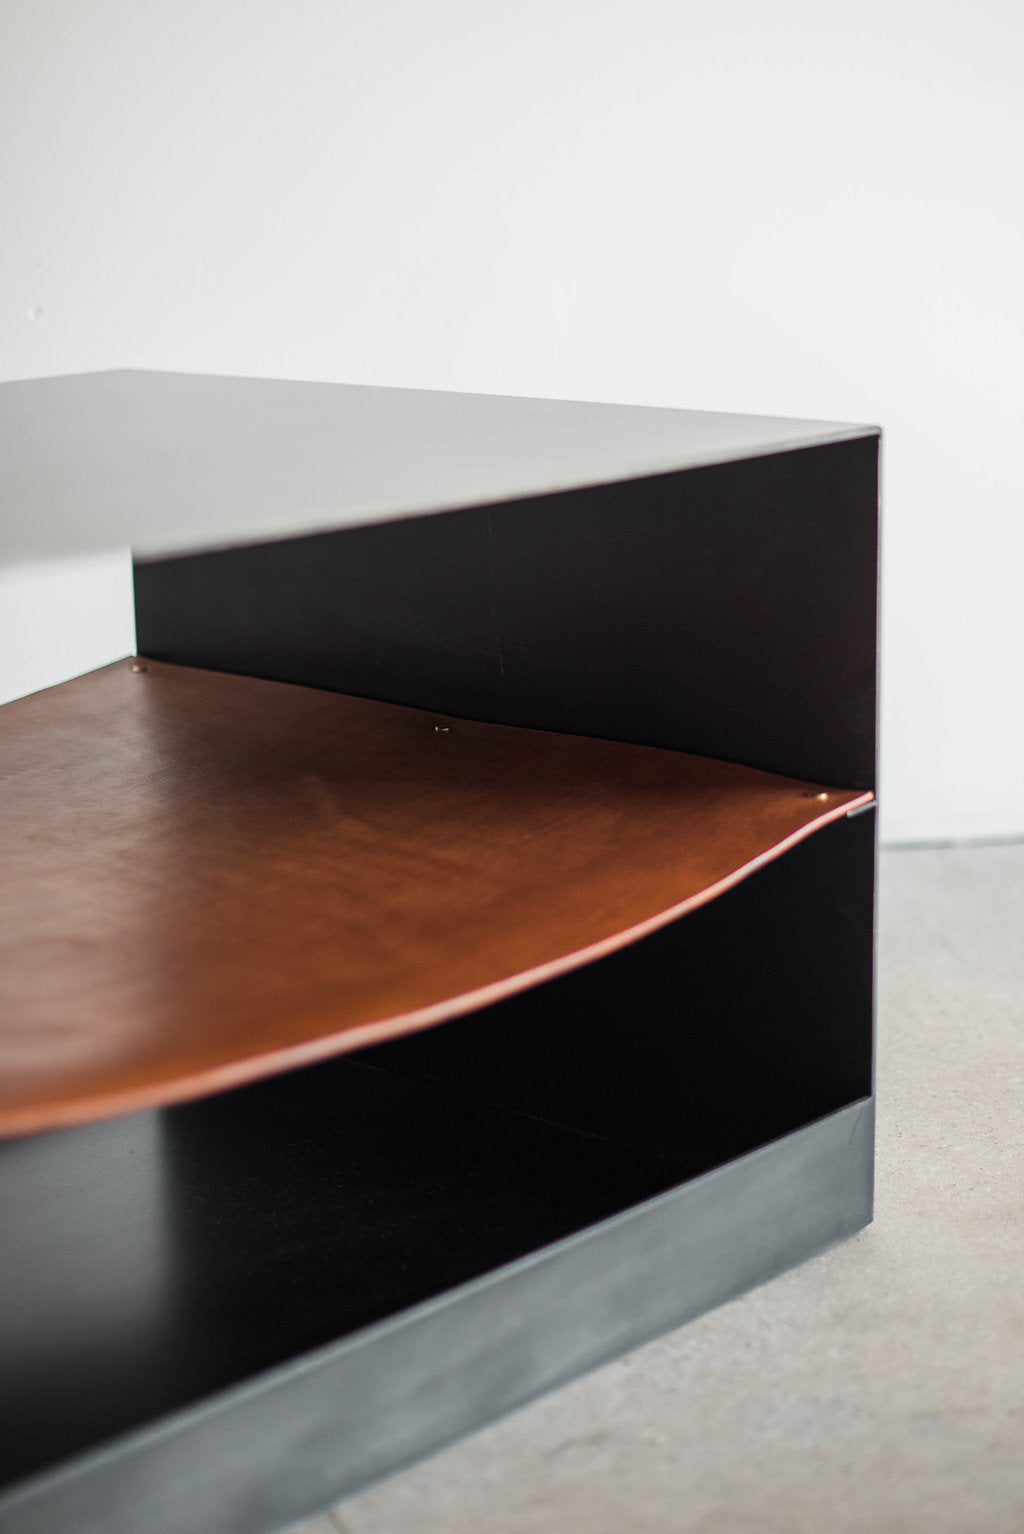 Latigo side table - side shot of leather and metal casing